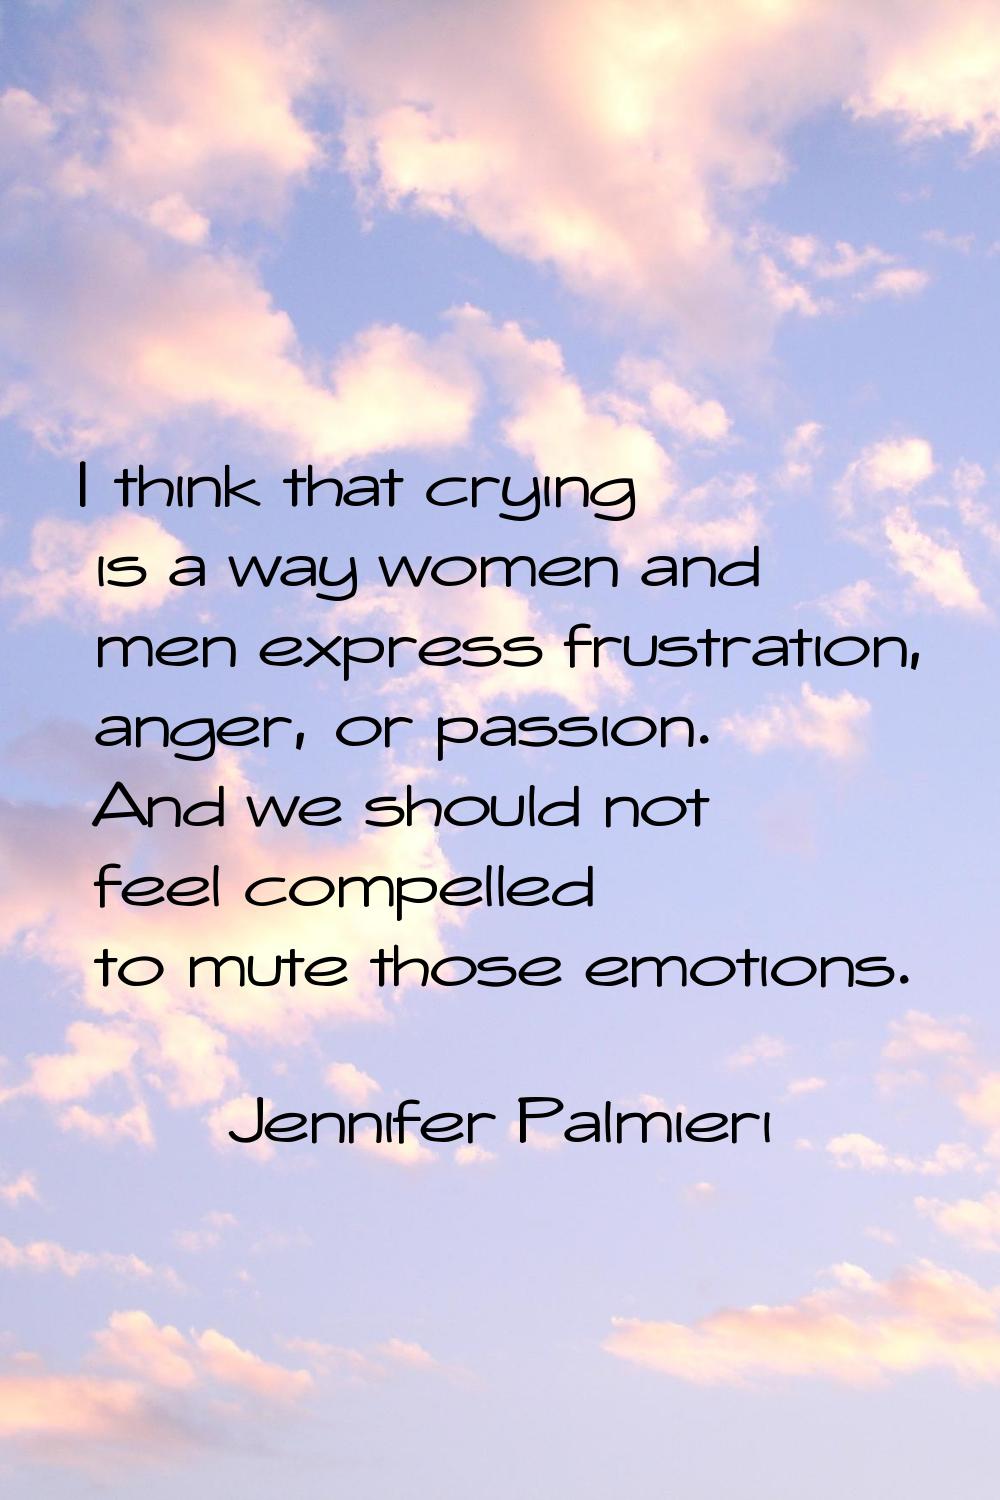 I think that crying is a way women and men express frustration, anger, or passion. And we should no